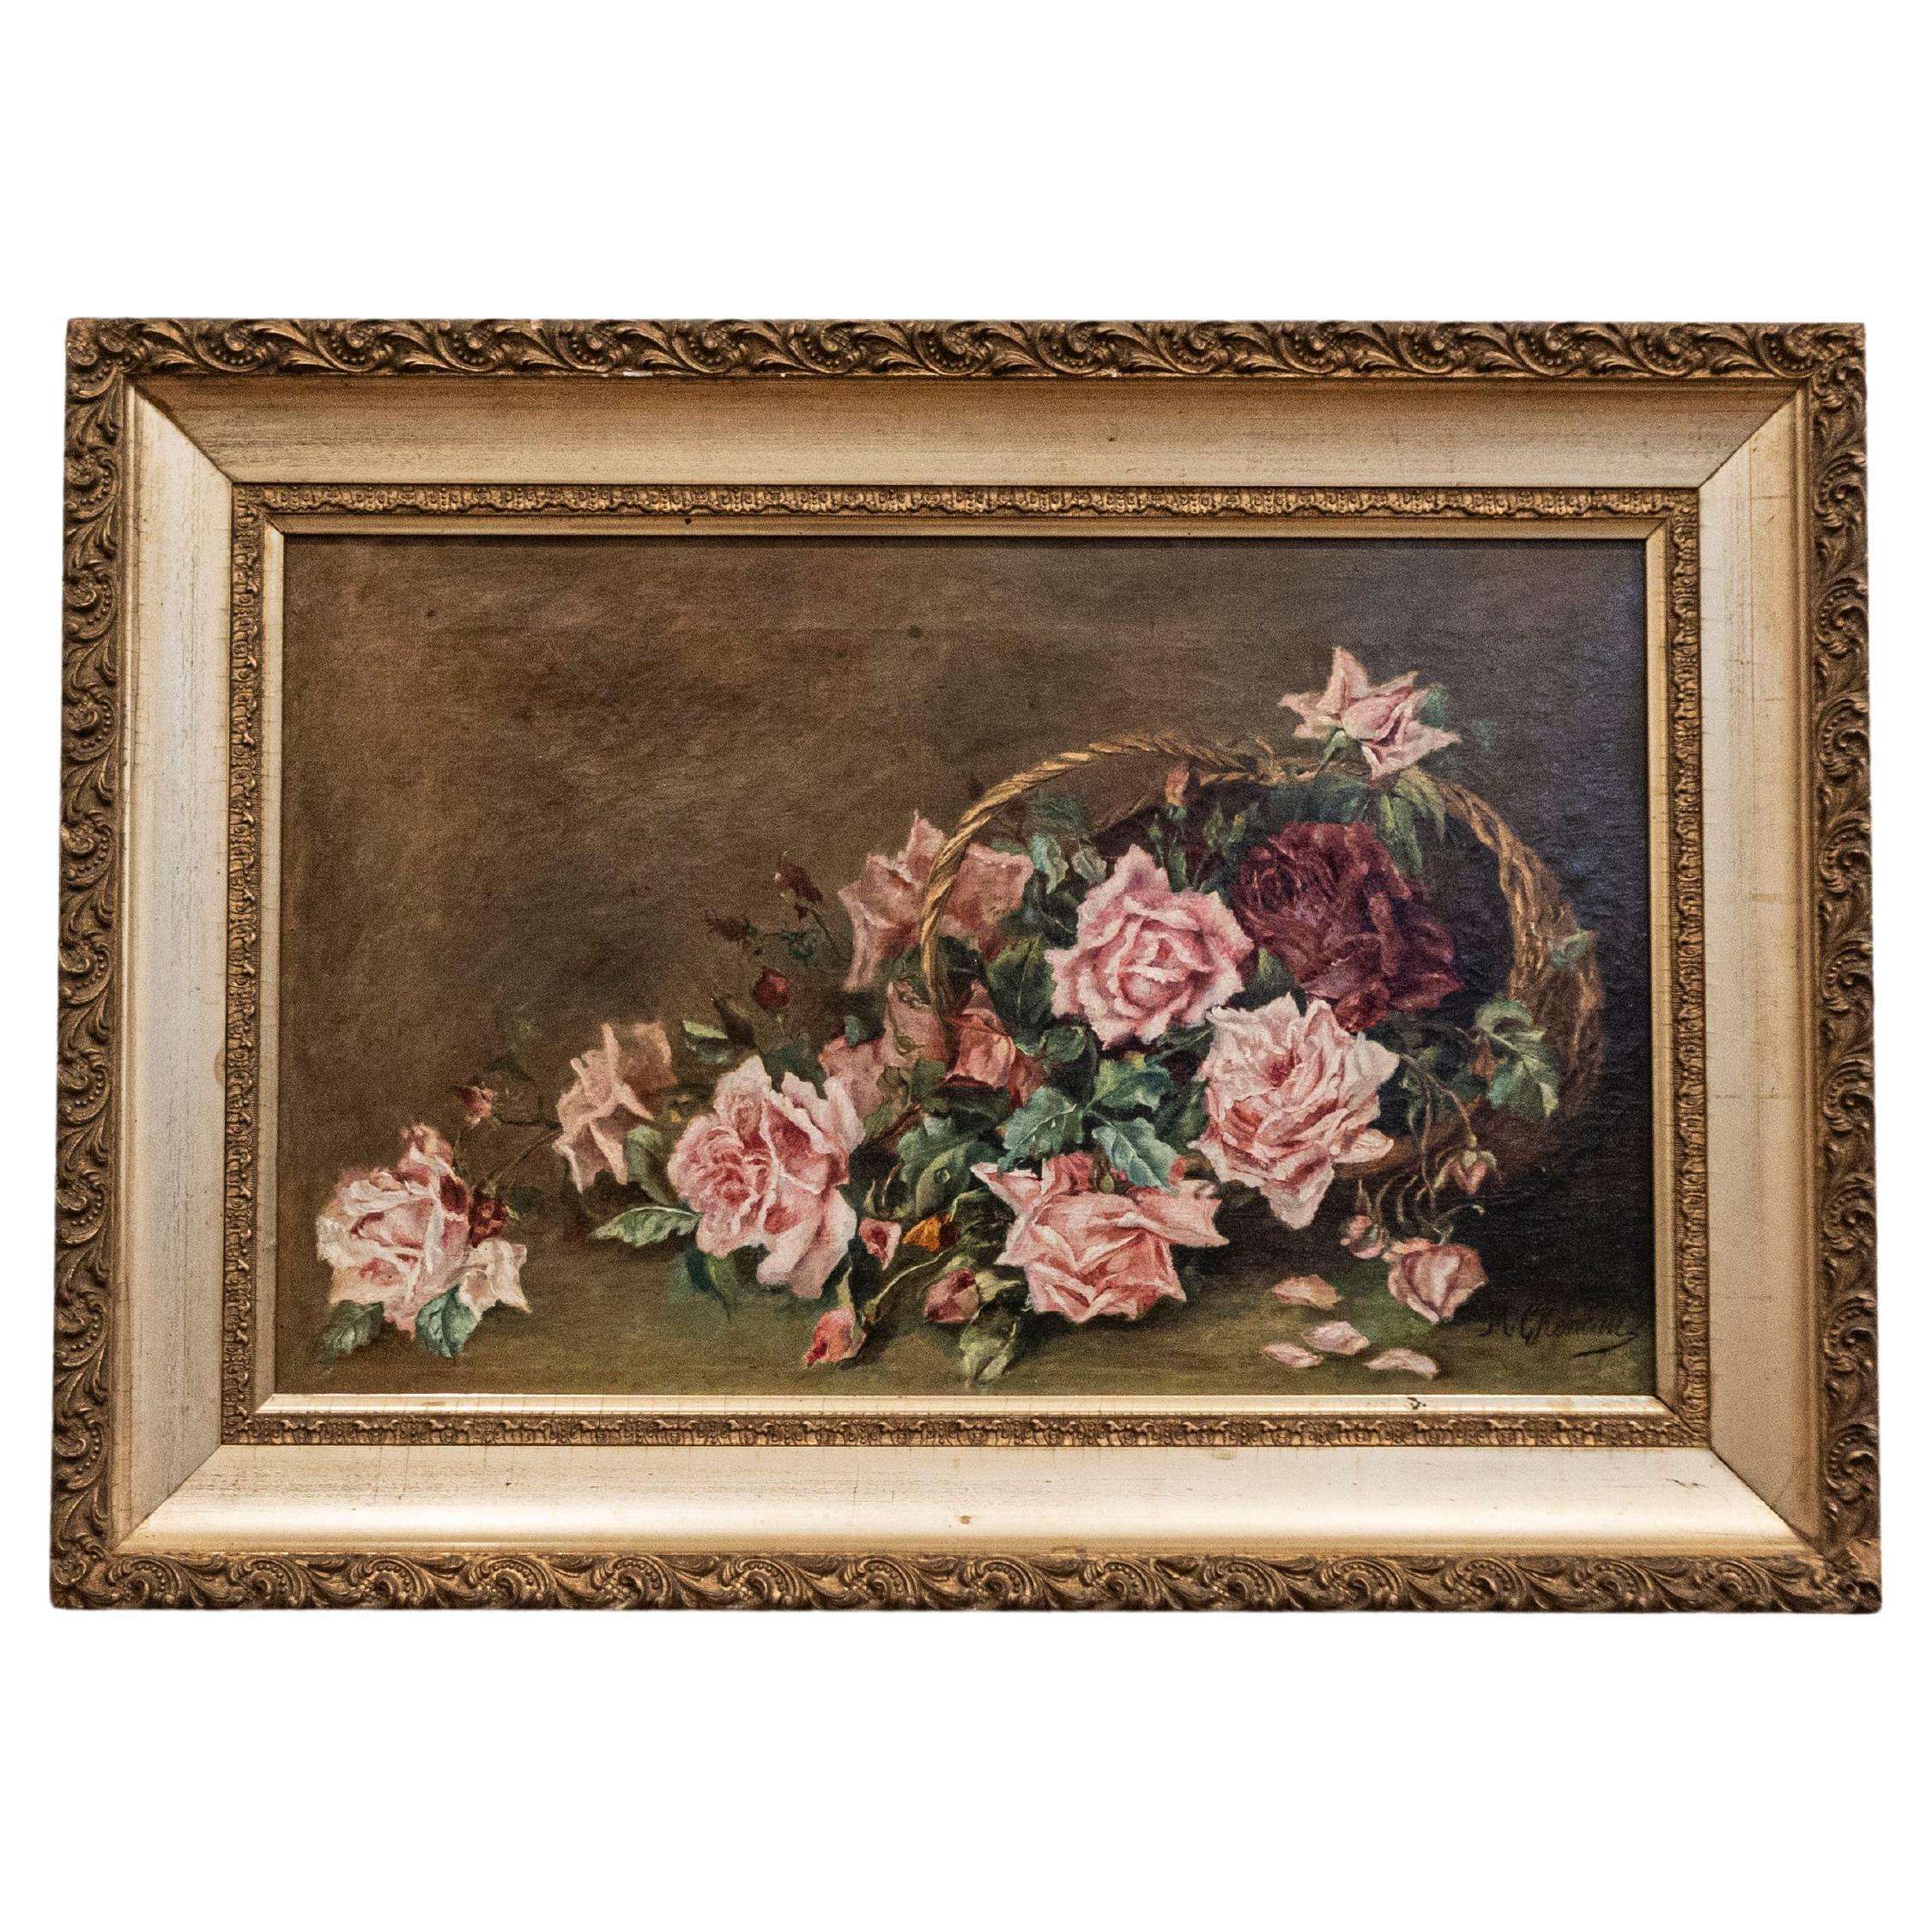 French 19th Century Framed Floral Oil on Canvas Painting Depicting Roses